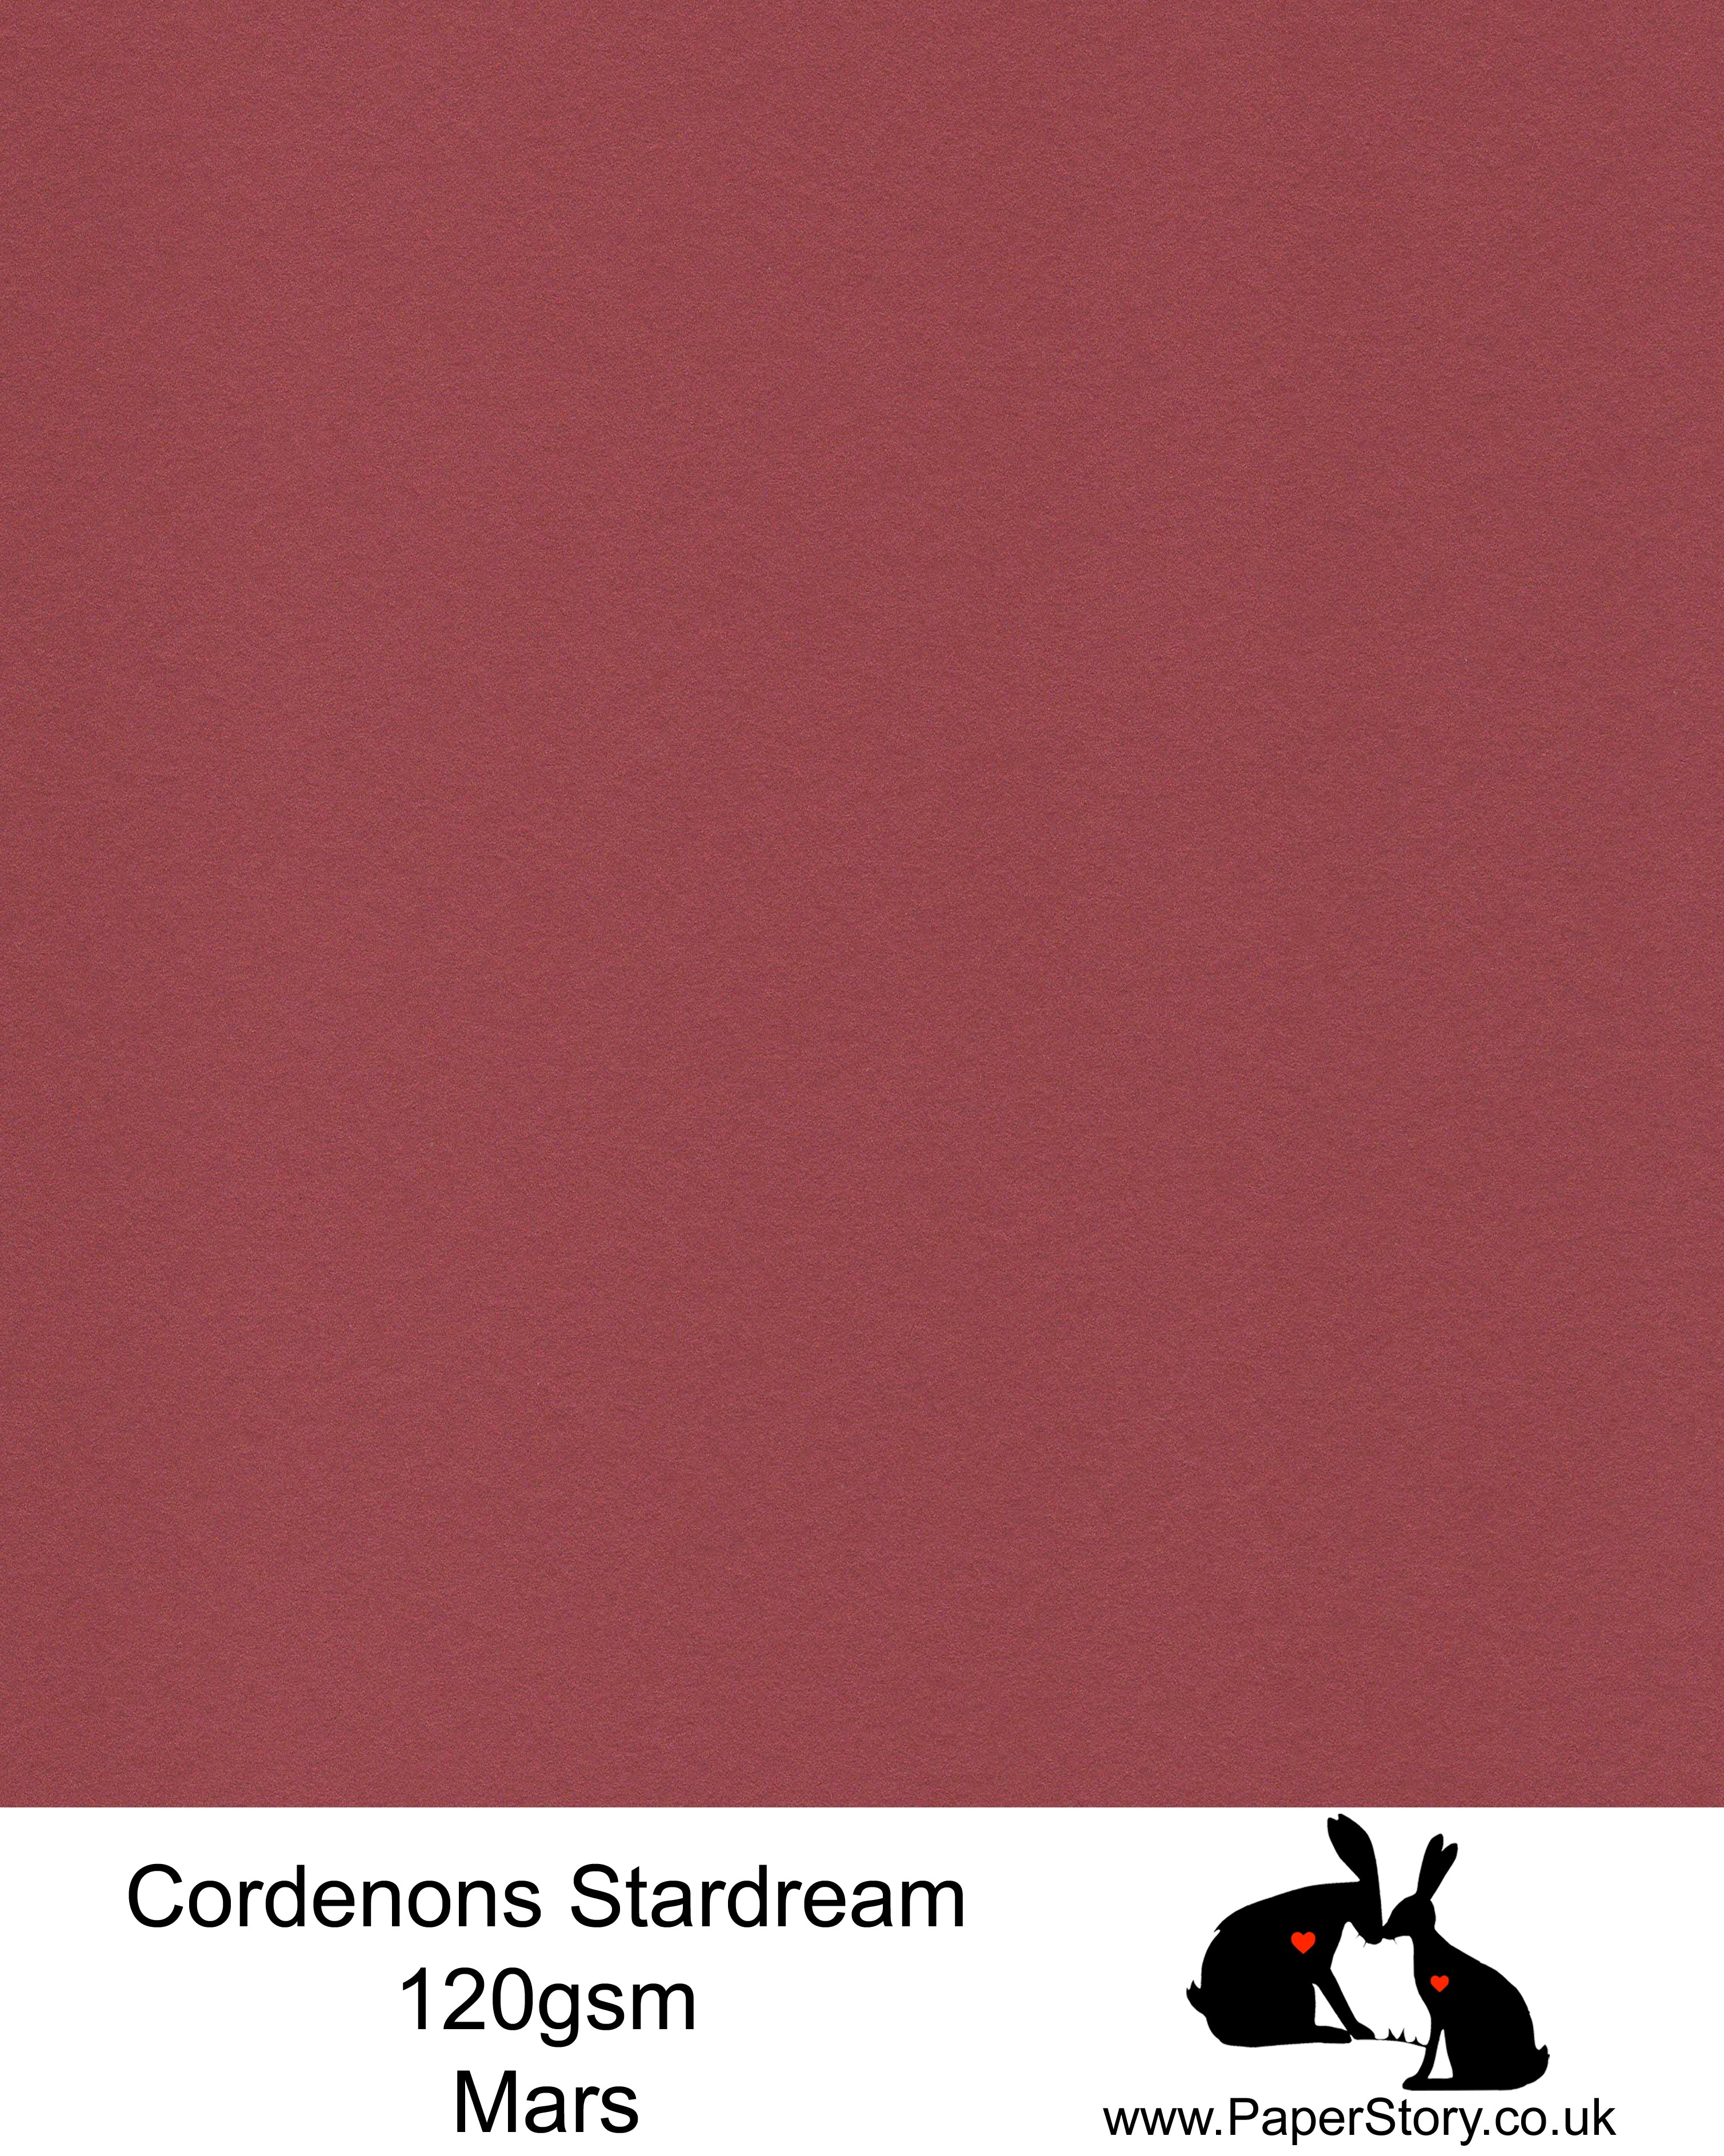 A4 Stardream 120gsm paper for Papercutting, craft, flower making  and wedding stationery. Copper, red brown shimmering metallic paper. Stardream is a luxury Italian paper from Italy, it is a double sided quality Pearlescent paper with a matching colour core. FSC Certified, acid free, archival and PH Neutral